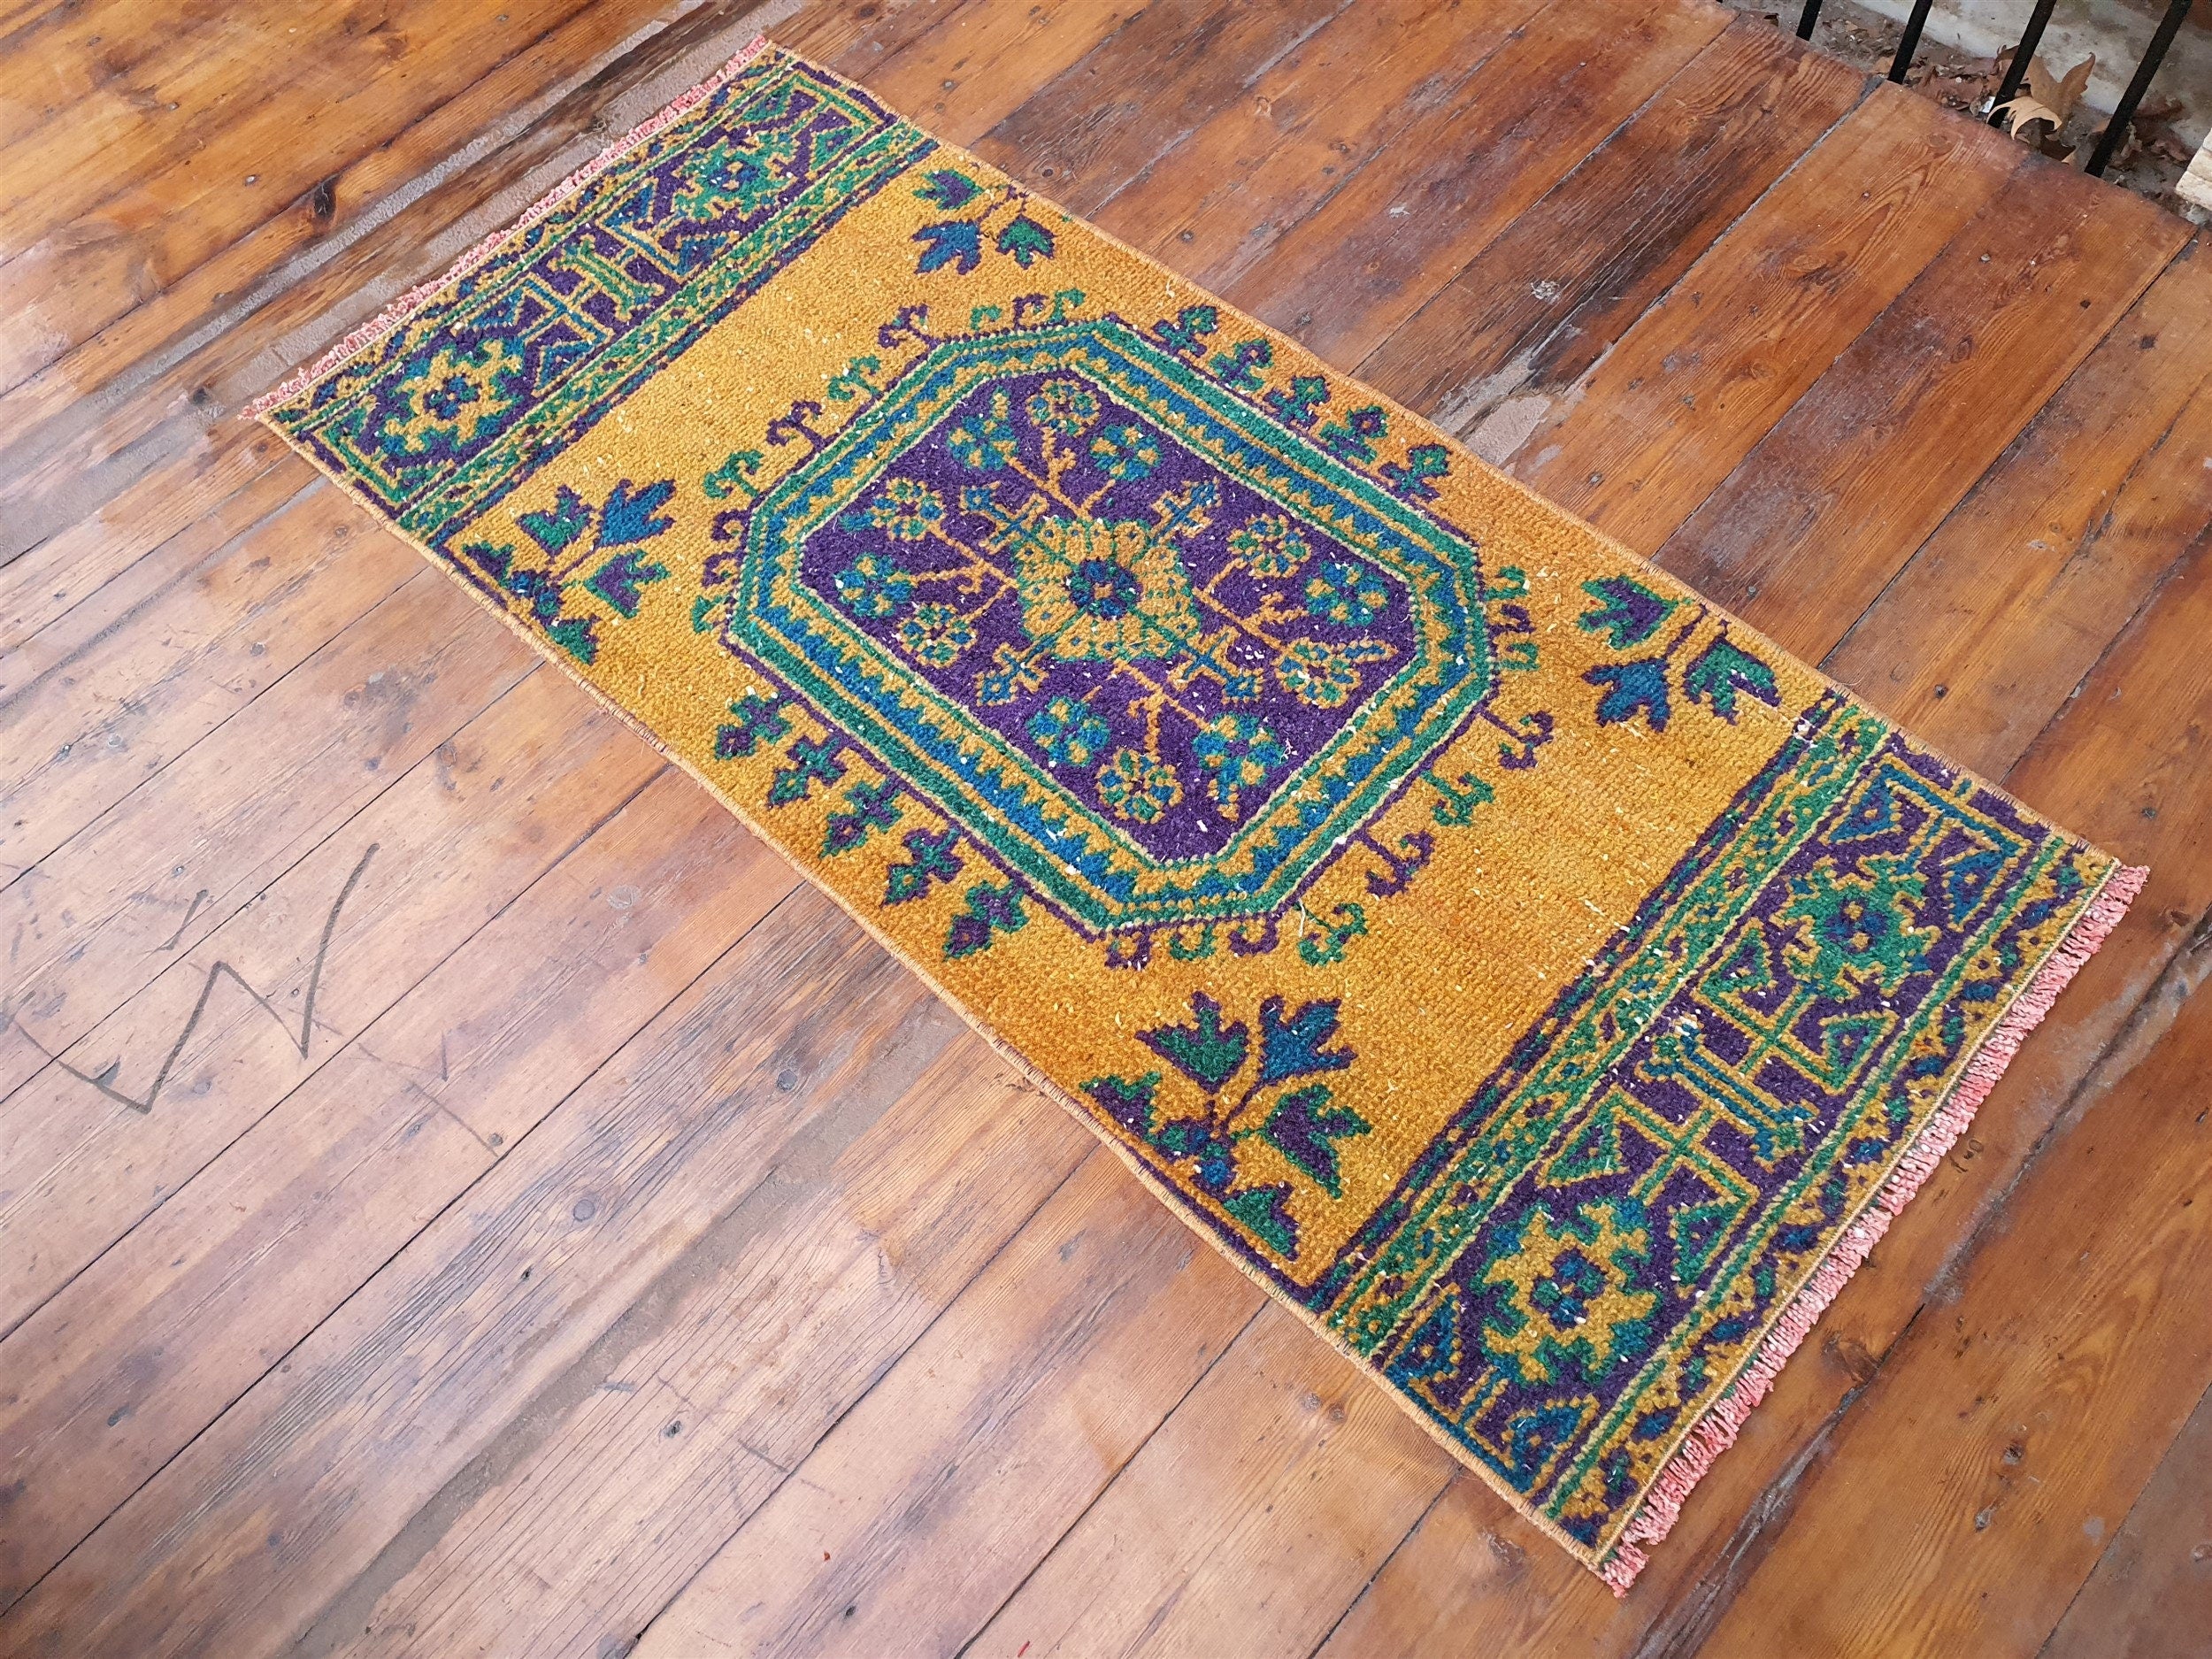 Small Turkish Rug, 4 ft 4 in x 1 ft 9 in ft, Apricot Orange and Teal Green Vintage Faded Distressed Door Mat